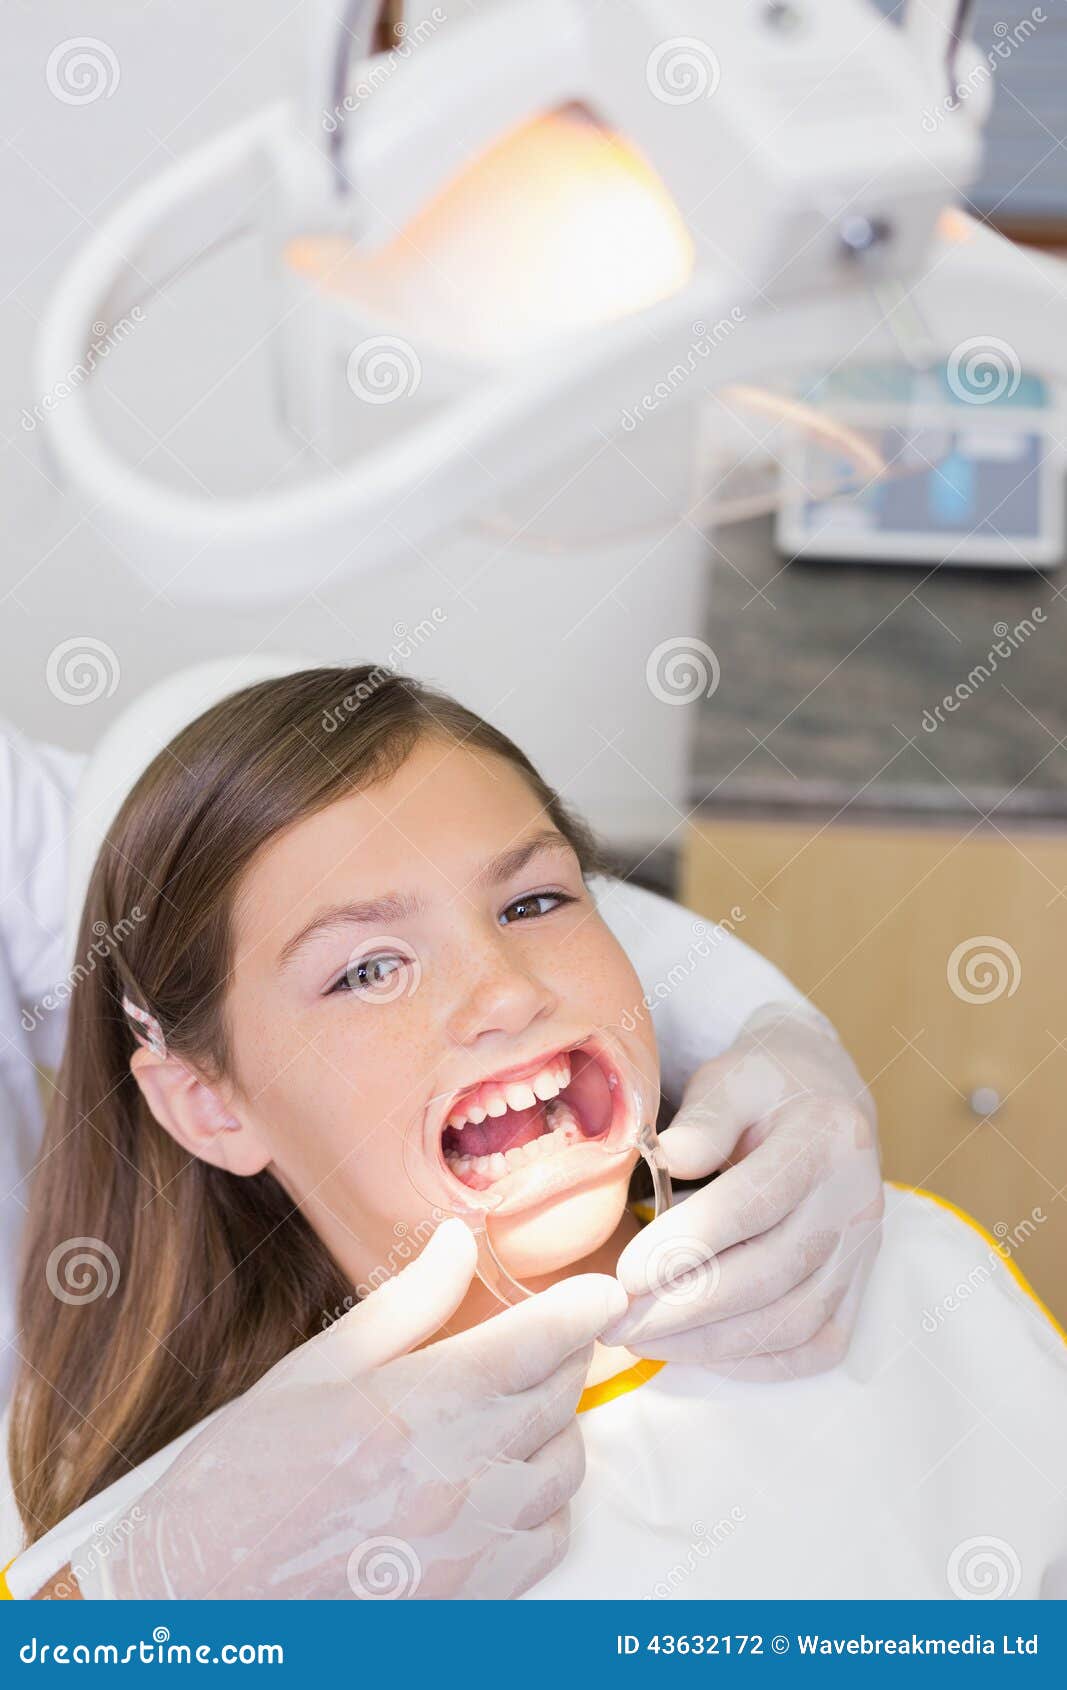 Dentist Putting Mouth Retractor On Little Girl Stock Photo - Image